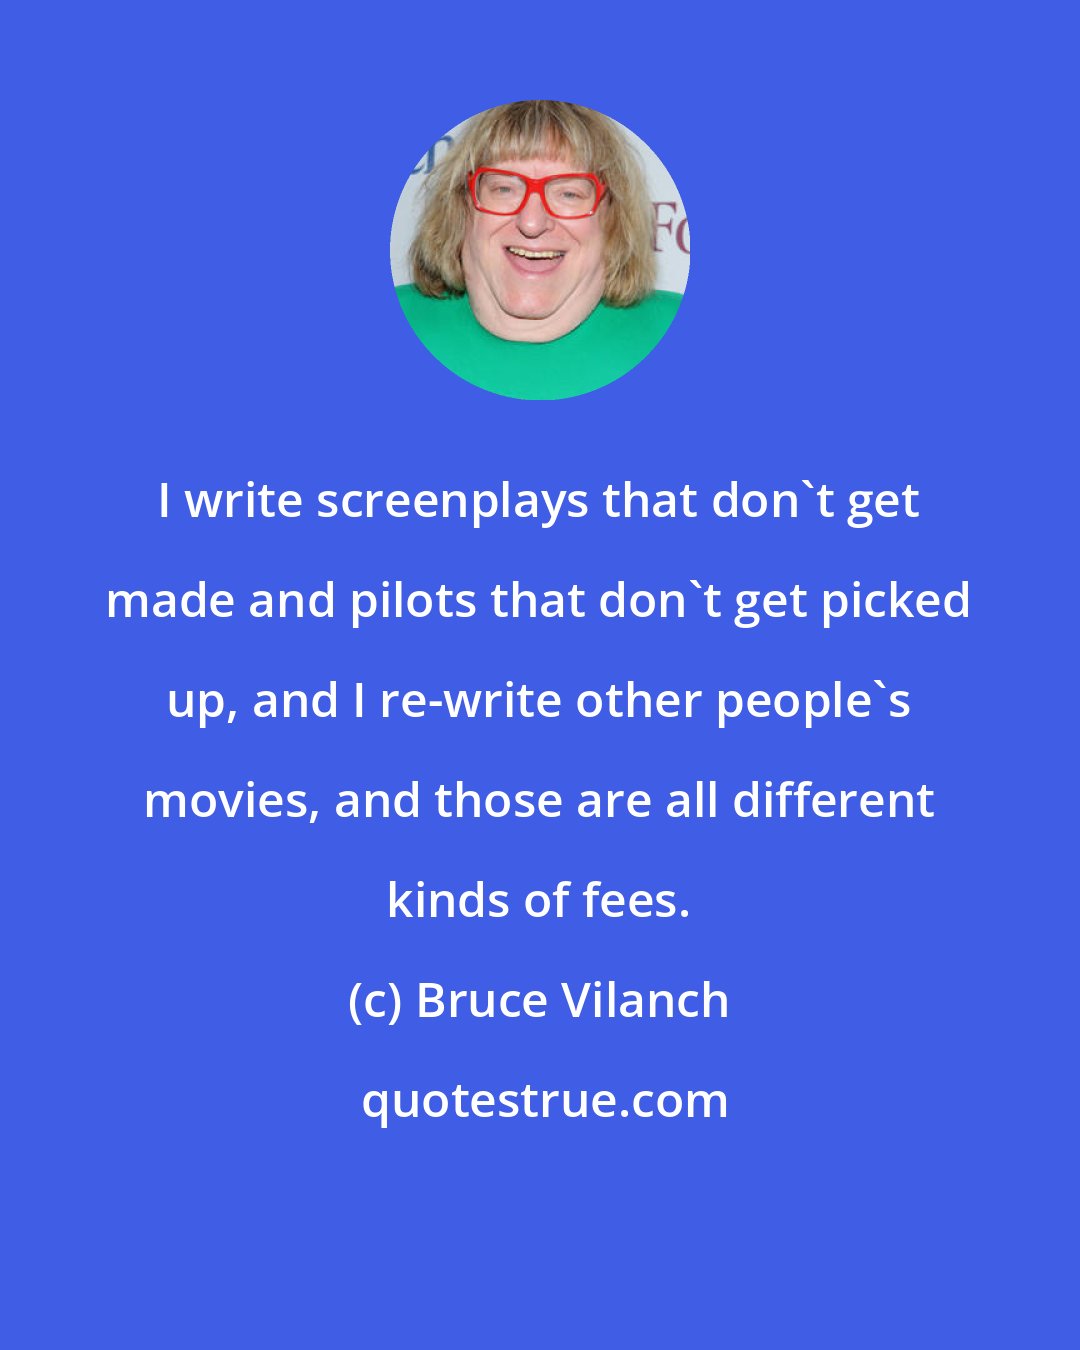 Bruce Vilanch: I write screenplays that don't get made and pilots that don't get picked up, and I re-write other people's movies, and those are all different kinds of fees.